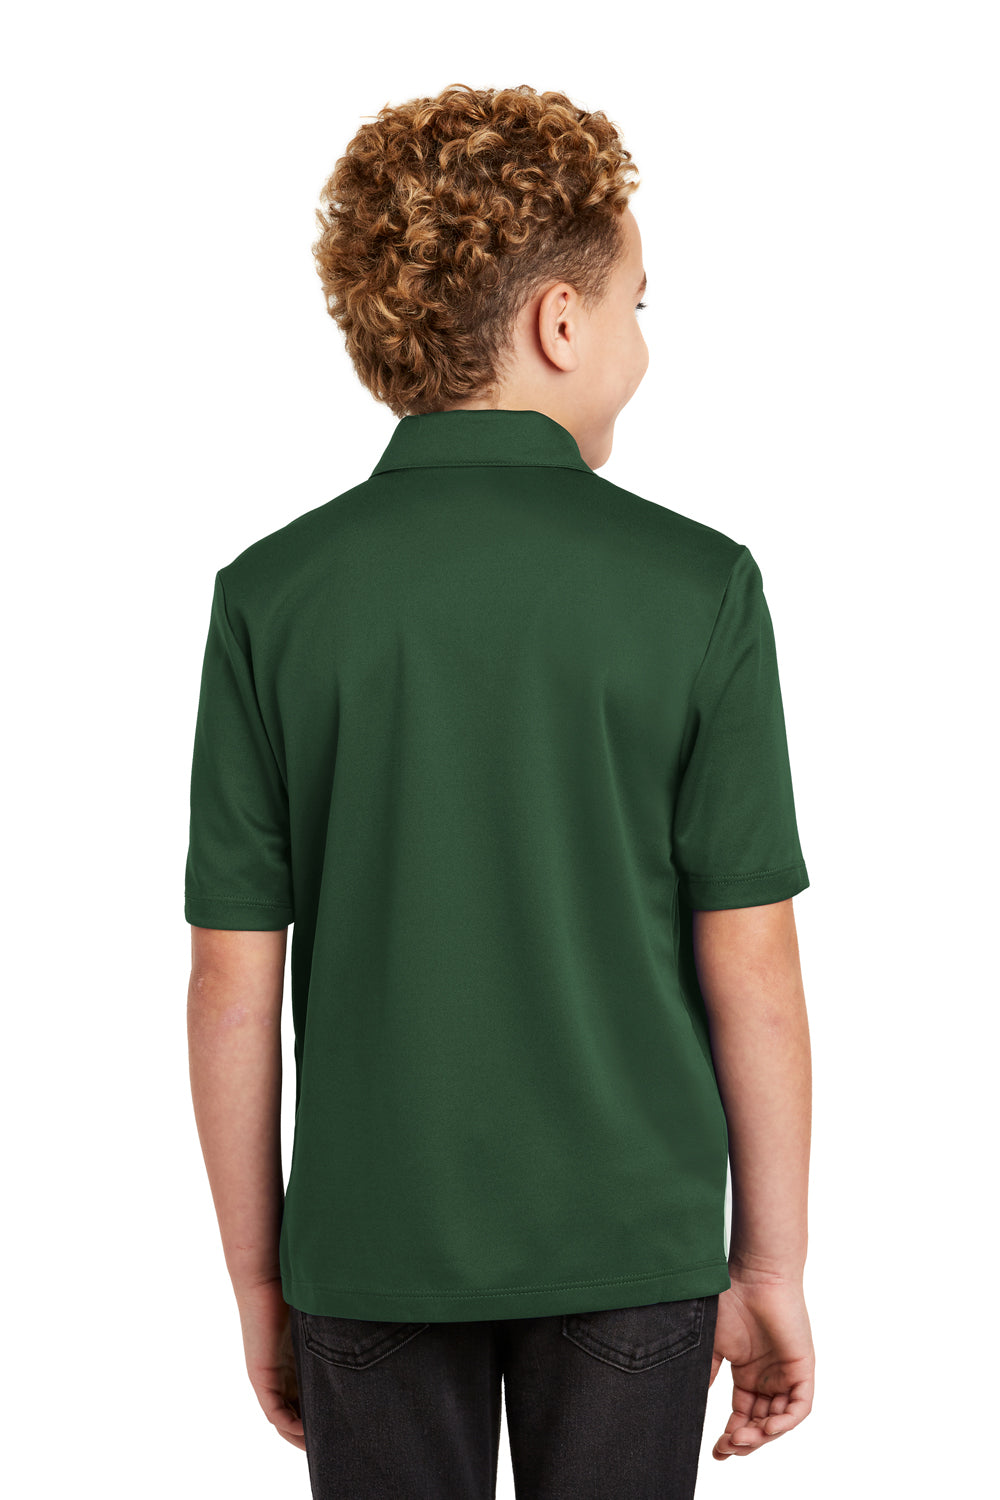 Port Authority Y540 Youth Silk Touch Performance Moisture Wicking Short Sleeve Polo Shirt Forest Green Back